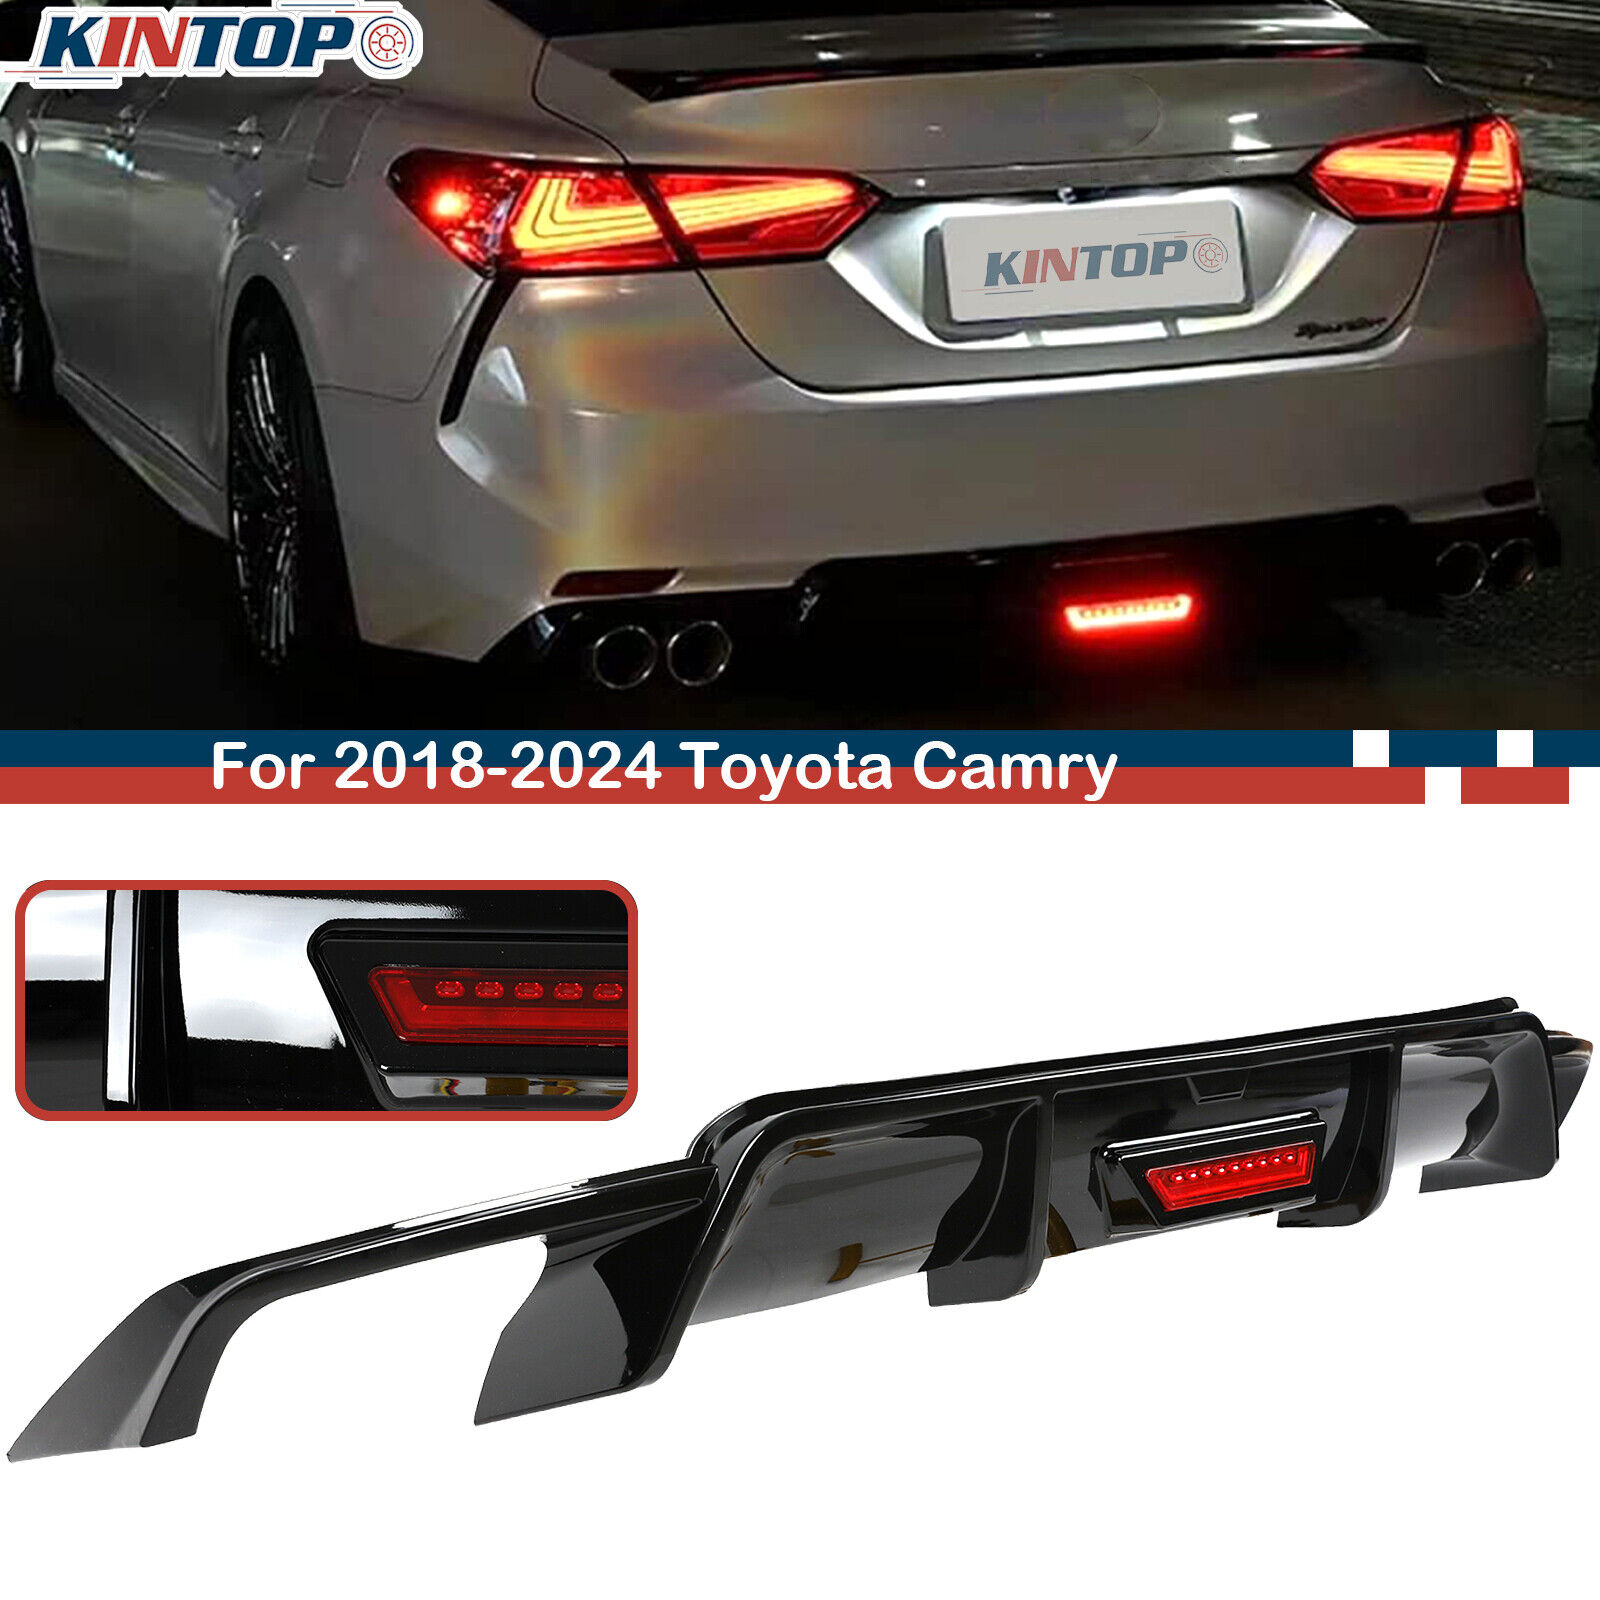 Rear Bumper Diffuser for 2018-2024 Toyota Camry SE XSE Glossy Black W/ LED Light